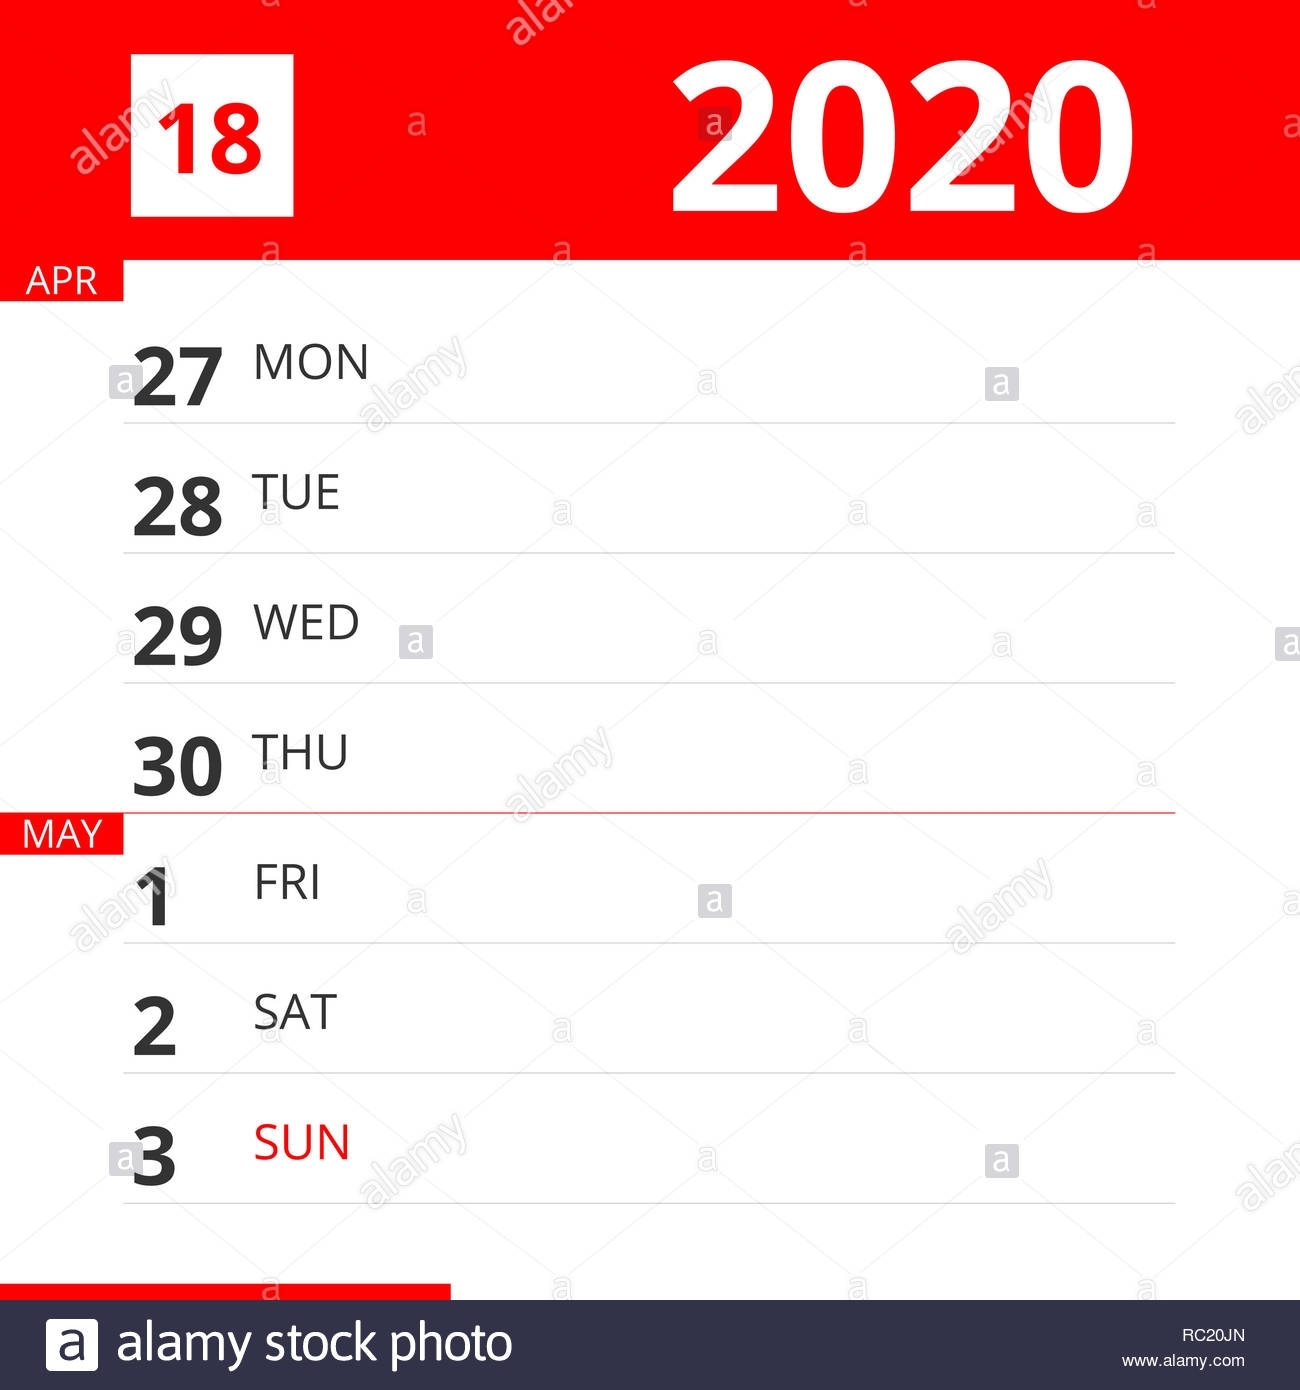 Calendar Planner For Week 18 In 2020, Ends May 3, 2020 Stock